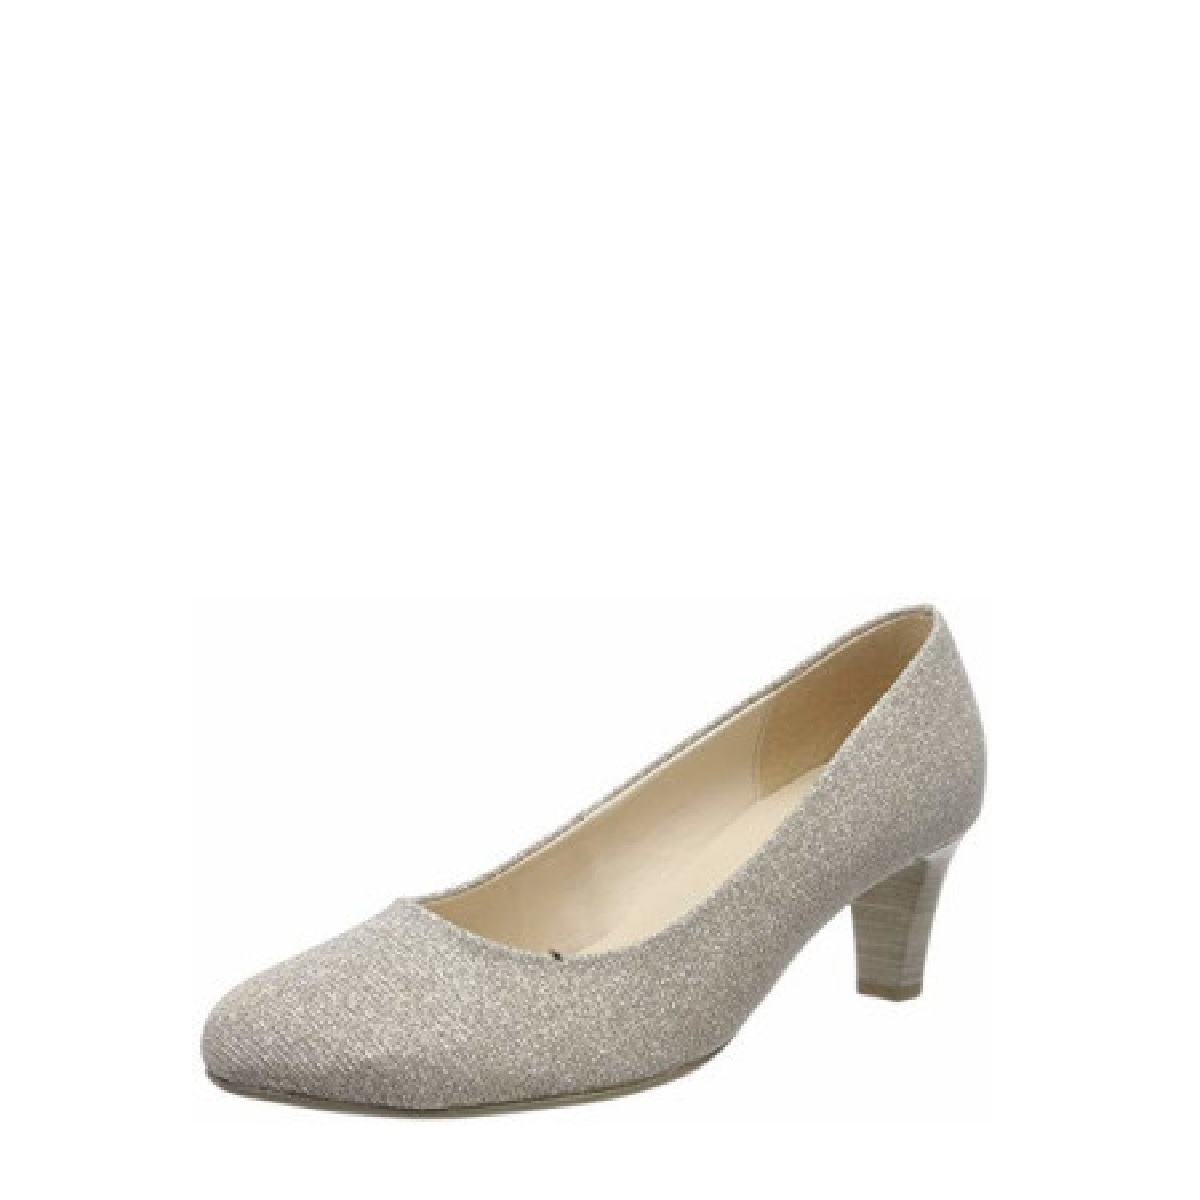 Gabor Ladies Court Shoe in Sparkly Gold finish - County Shoes Dorchester